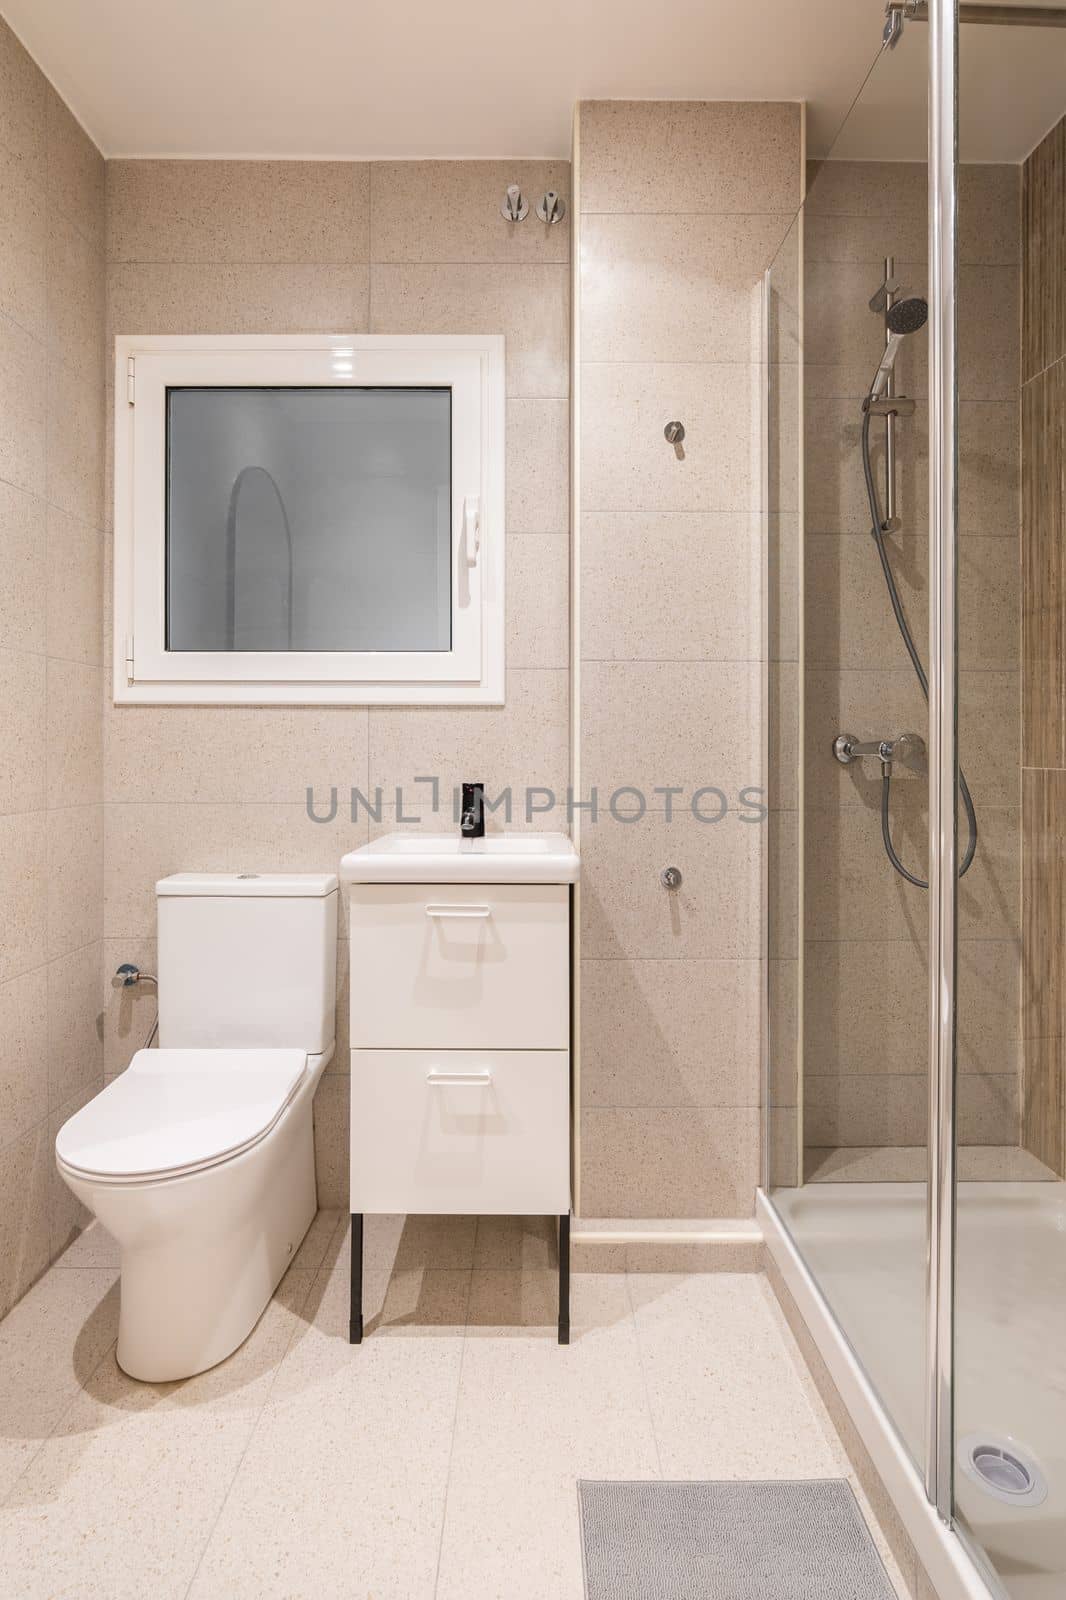 Bathroom with small shower area enclosed by transparent glass wall. Washbasin on furniture with drawers for bathroom accessories. Window in wall with frosted glass and white frame. by apavlin